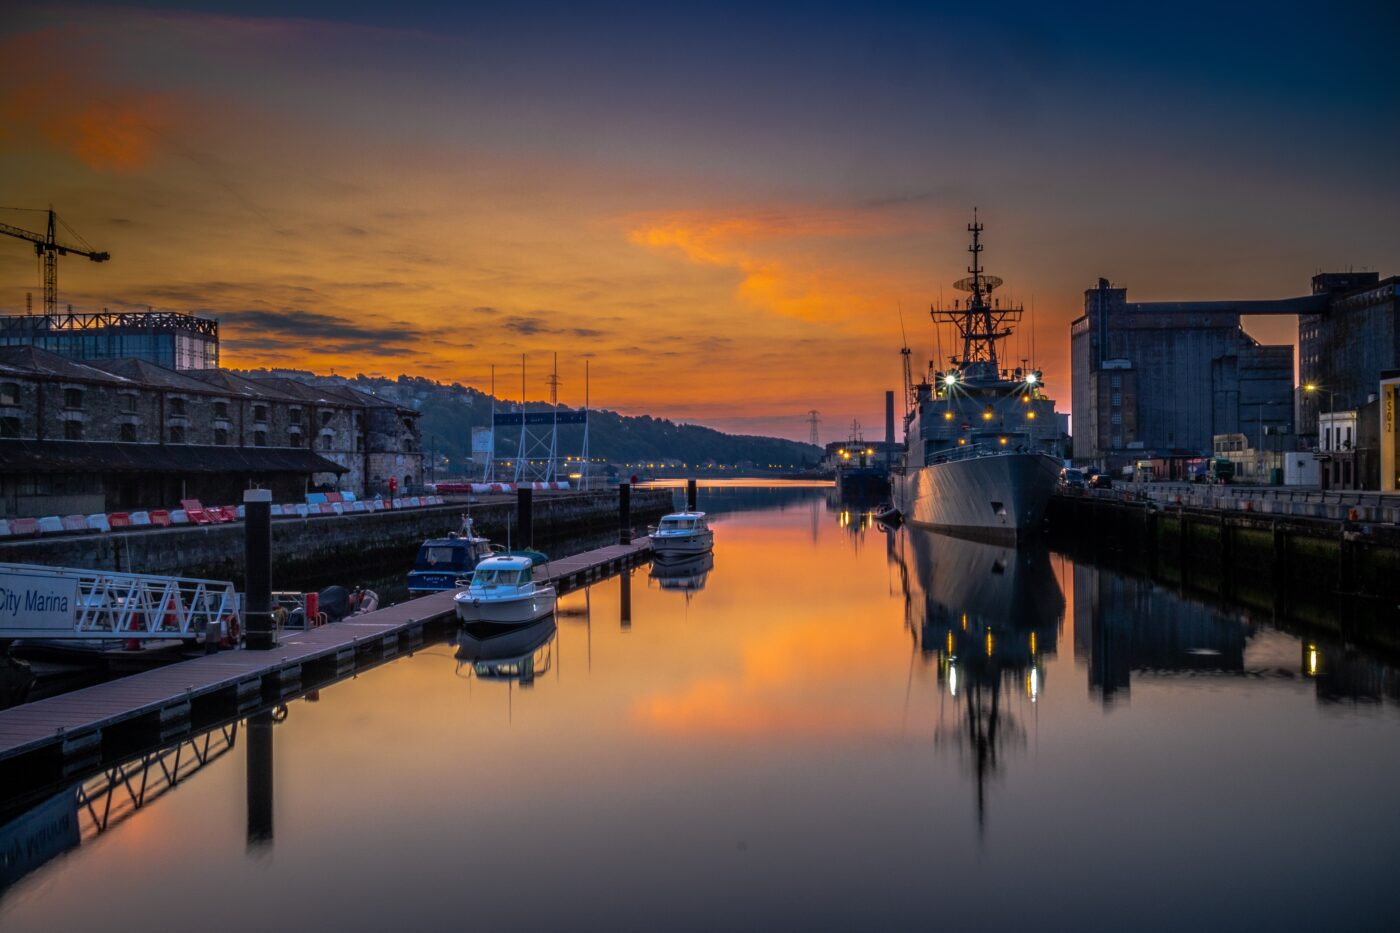 A beautiful sunset picture of the Port of Cork